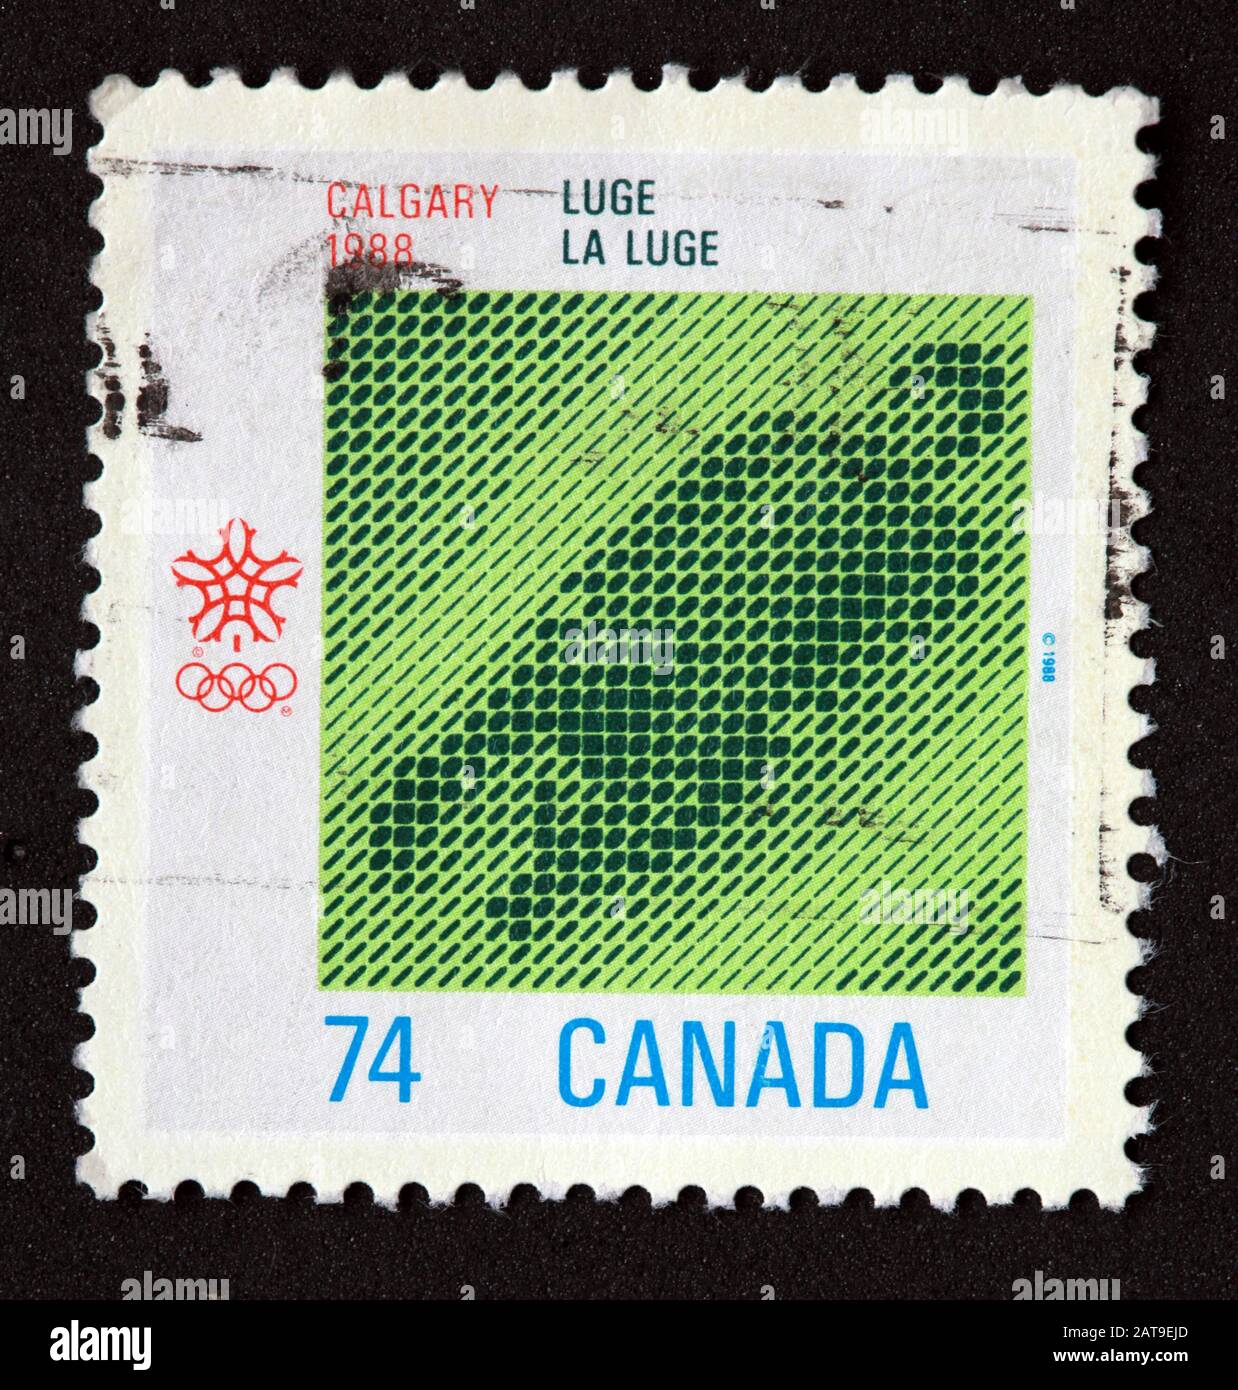 Canadian Stamp, Canada Stamp, Canada Post, used Stamp, 1988, Calgary 1988, Luge, la Luge, 74, 74c Stockfoto